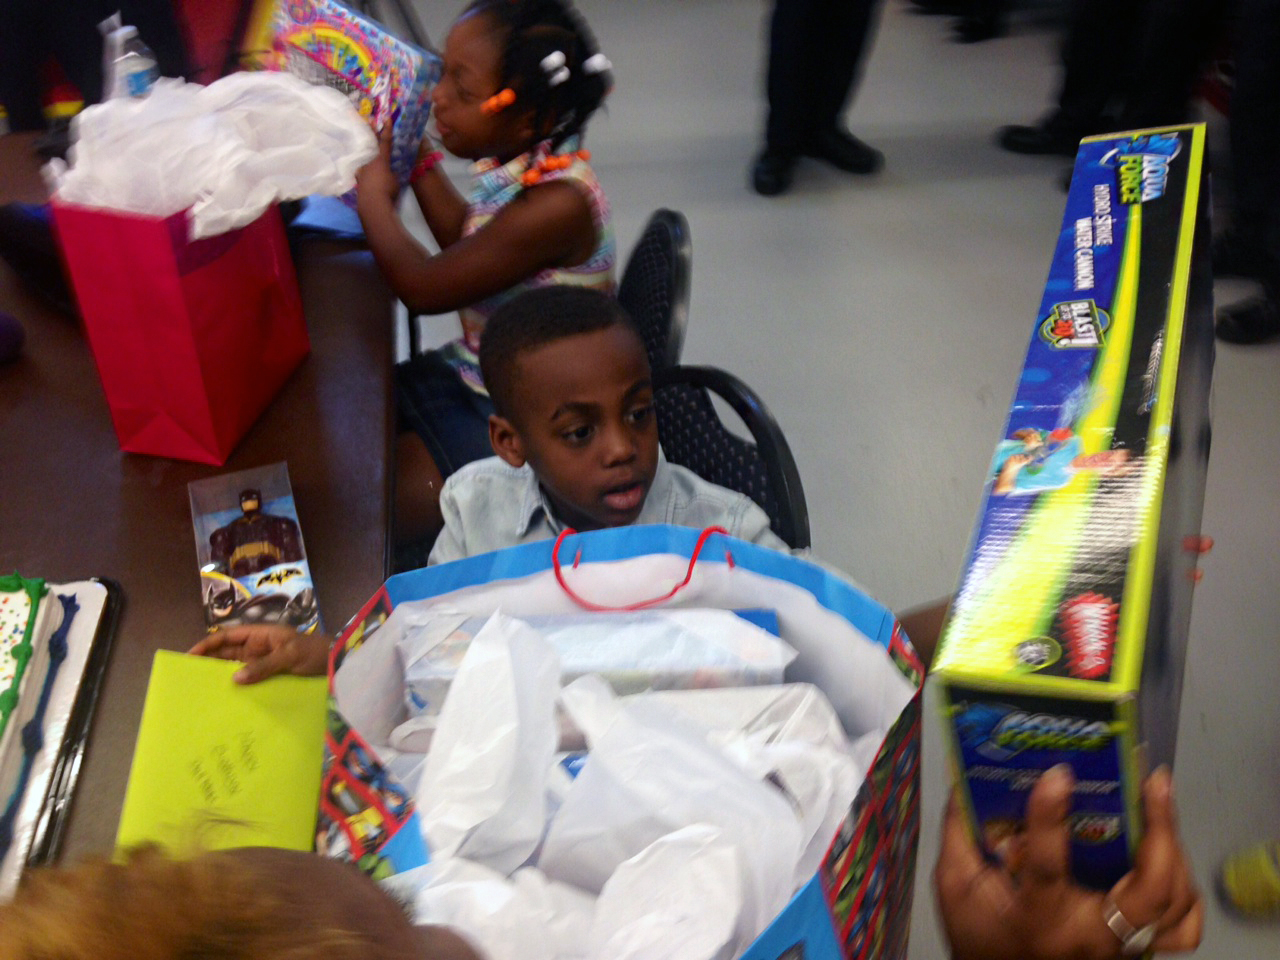 Dahmari Jenkins receives presents in celebration of his birthday and survival after being cut with a scalpel. (WTOP/Megan Cloherty)